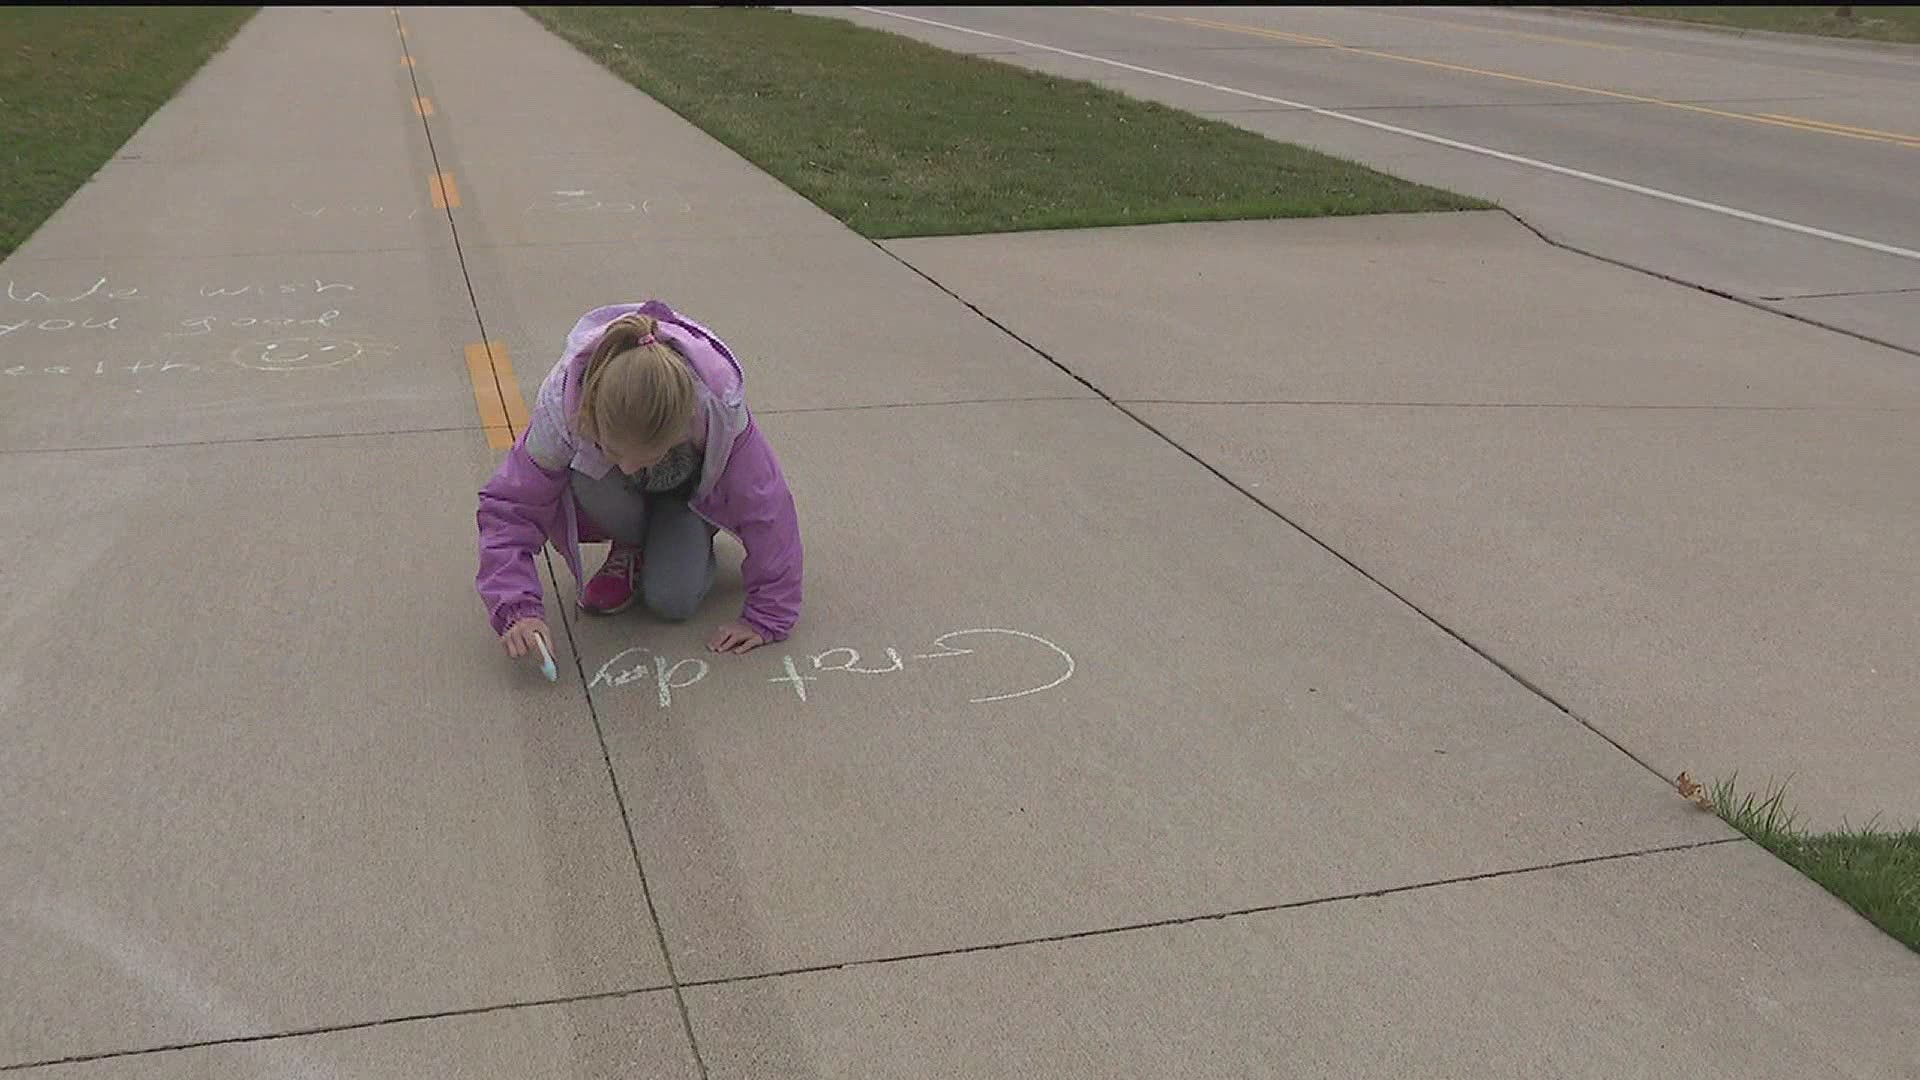 Local girl creates Positive Chalk Messages